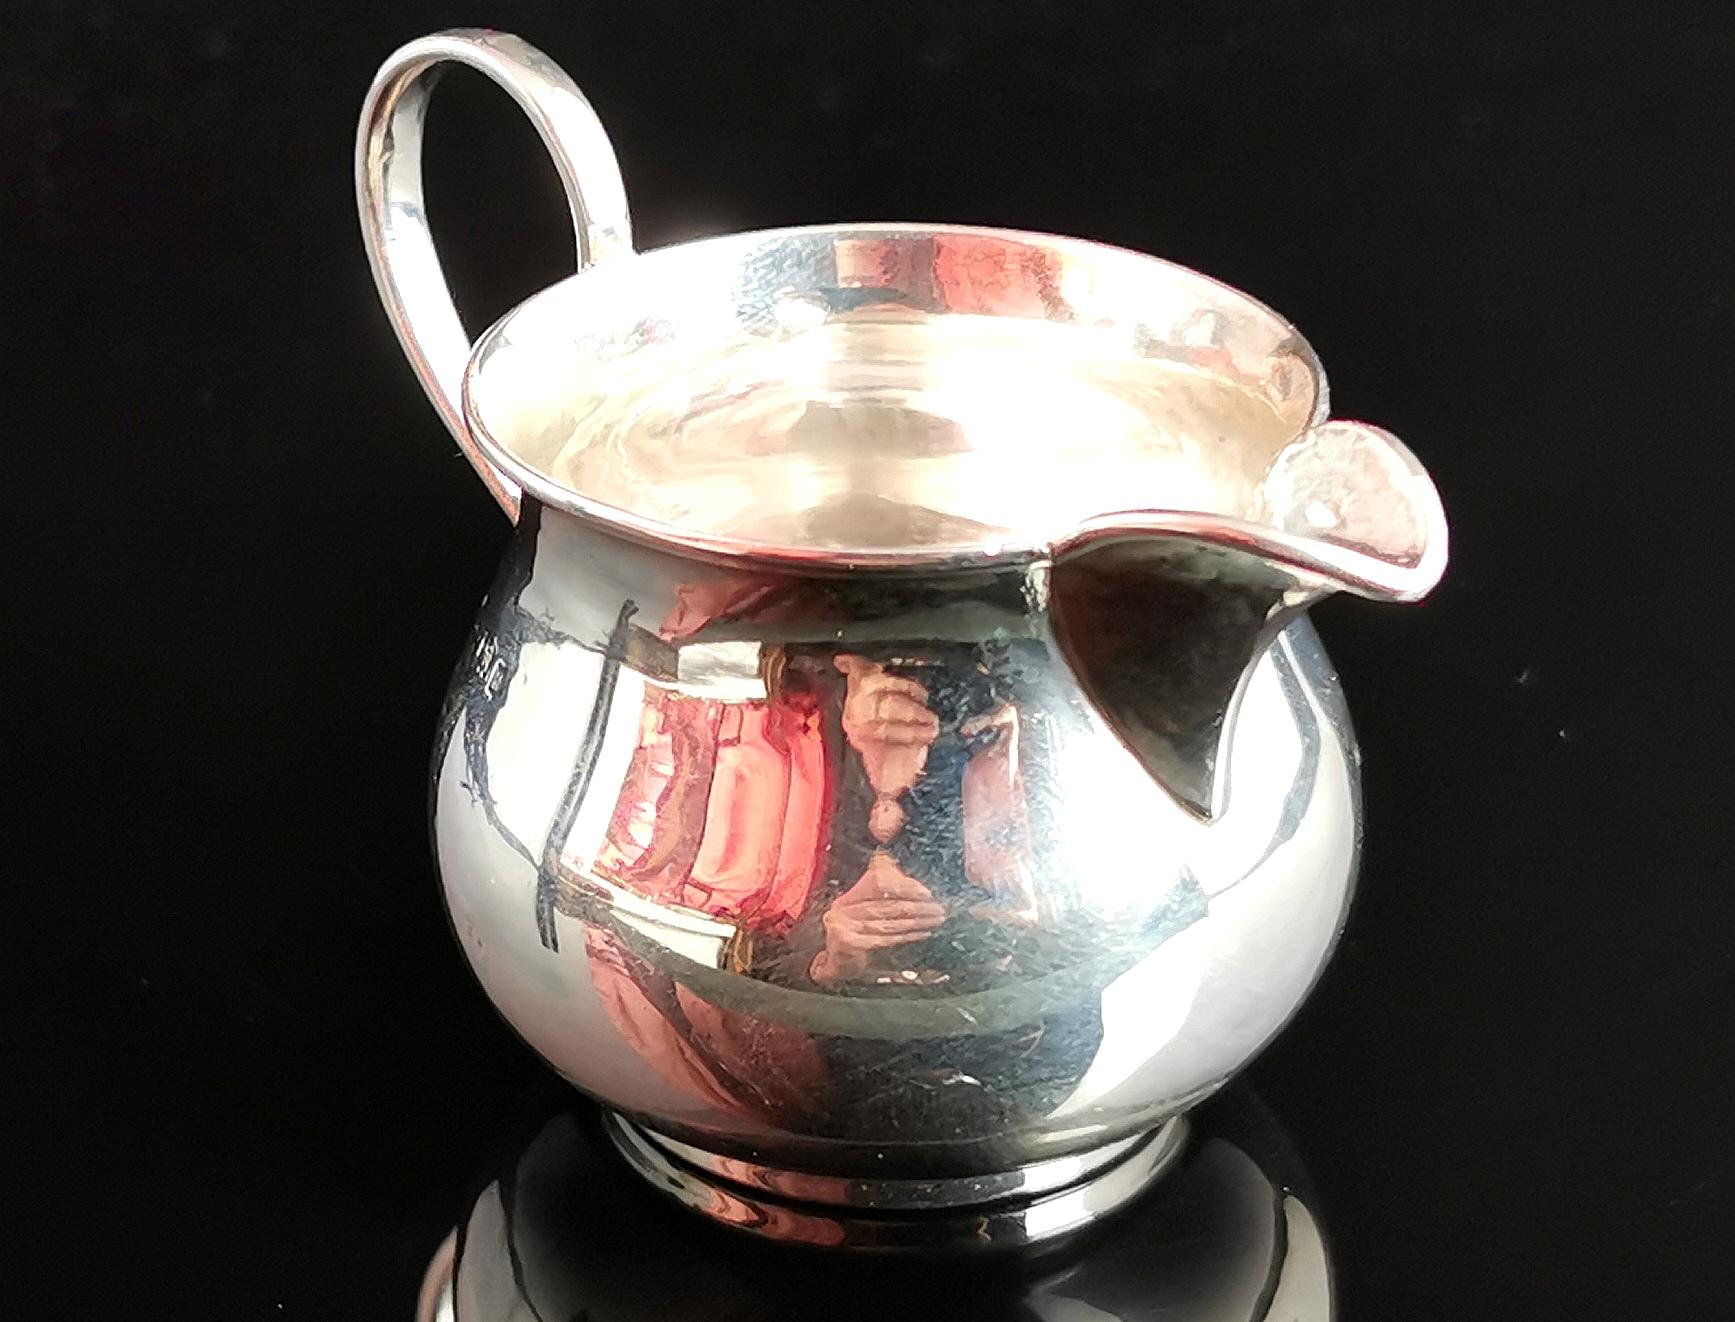 A very pretty vintage Art Deco era sterling silver Creamer or cream jug.

It is a small squat little jug with a bulbous body and a small scroll handle.

Perfect for afternoon tea or as a tea for one piece. 

A pretty piece made from solid